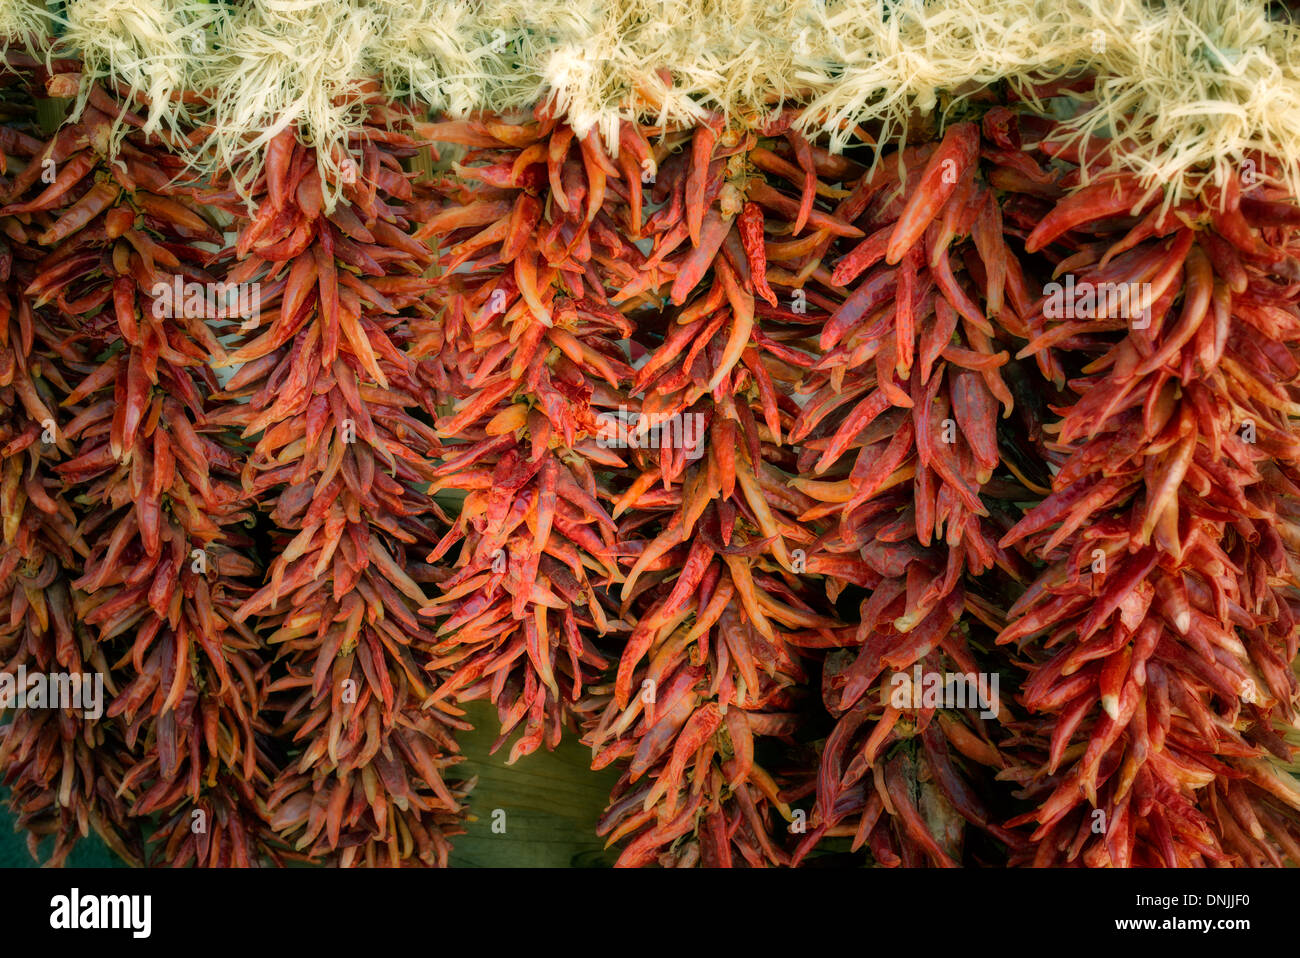 Red Chili peppers on string. Santa Fe, New Mexico Stock Photo